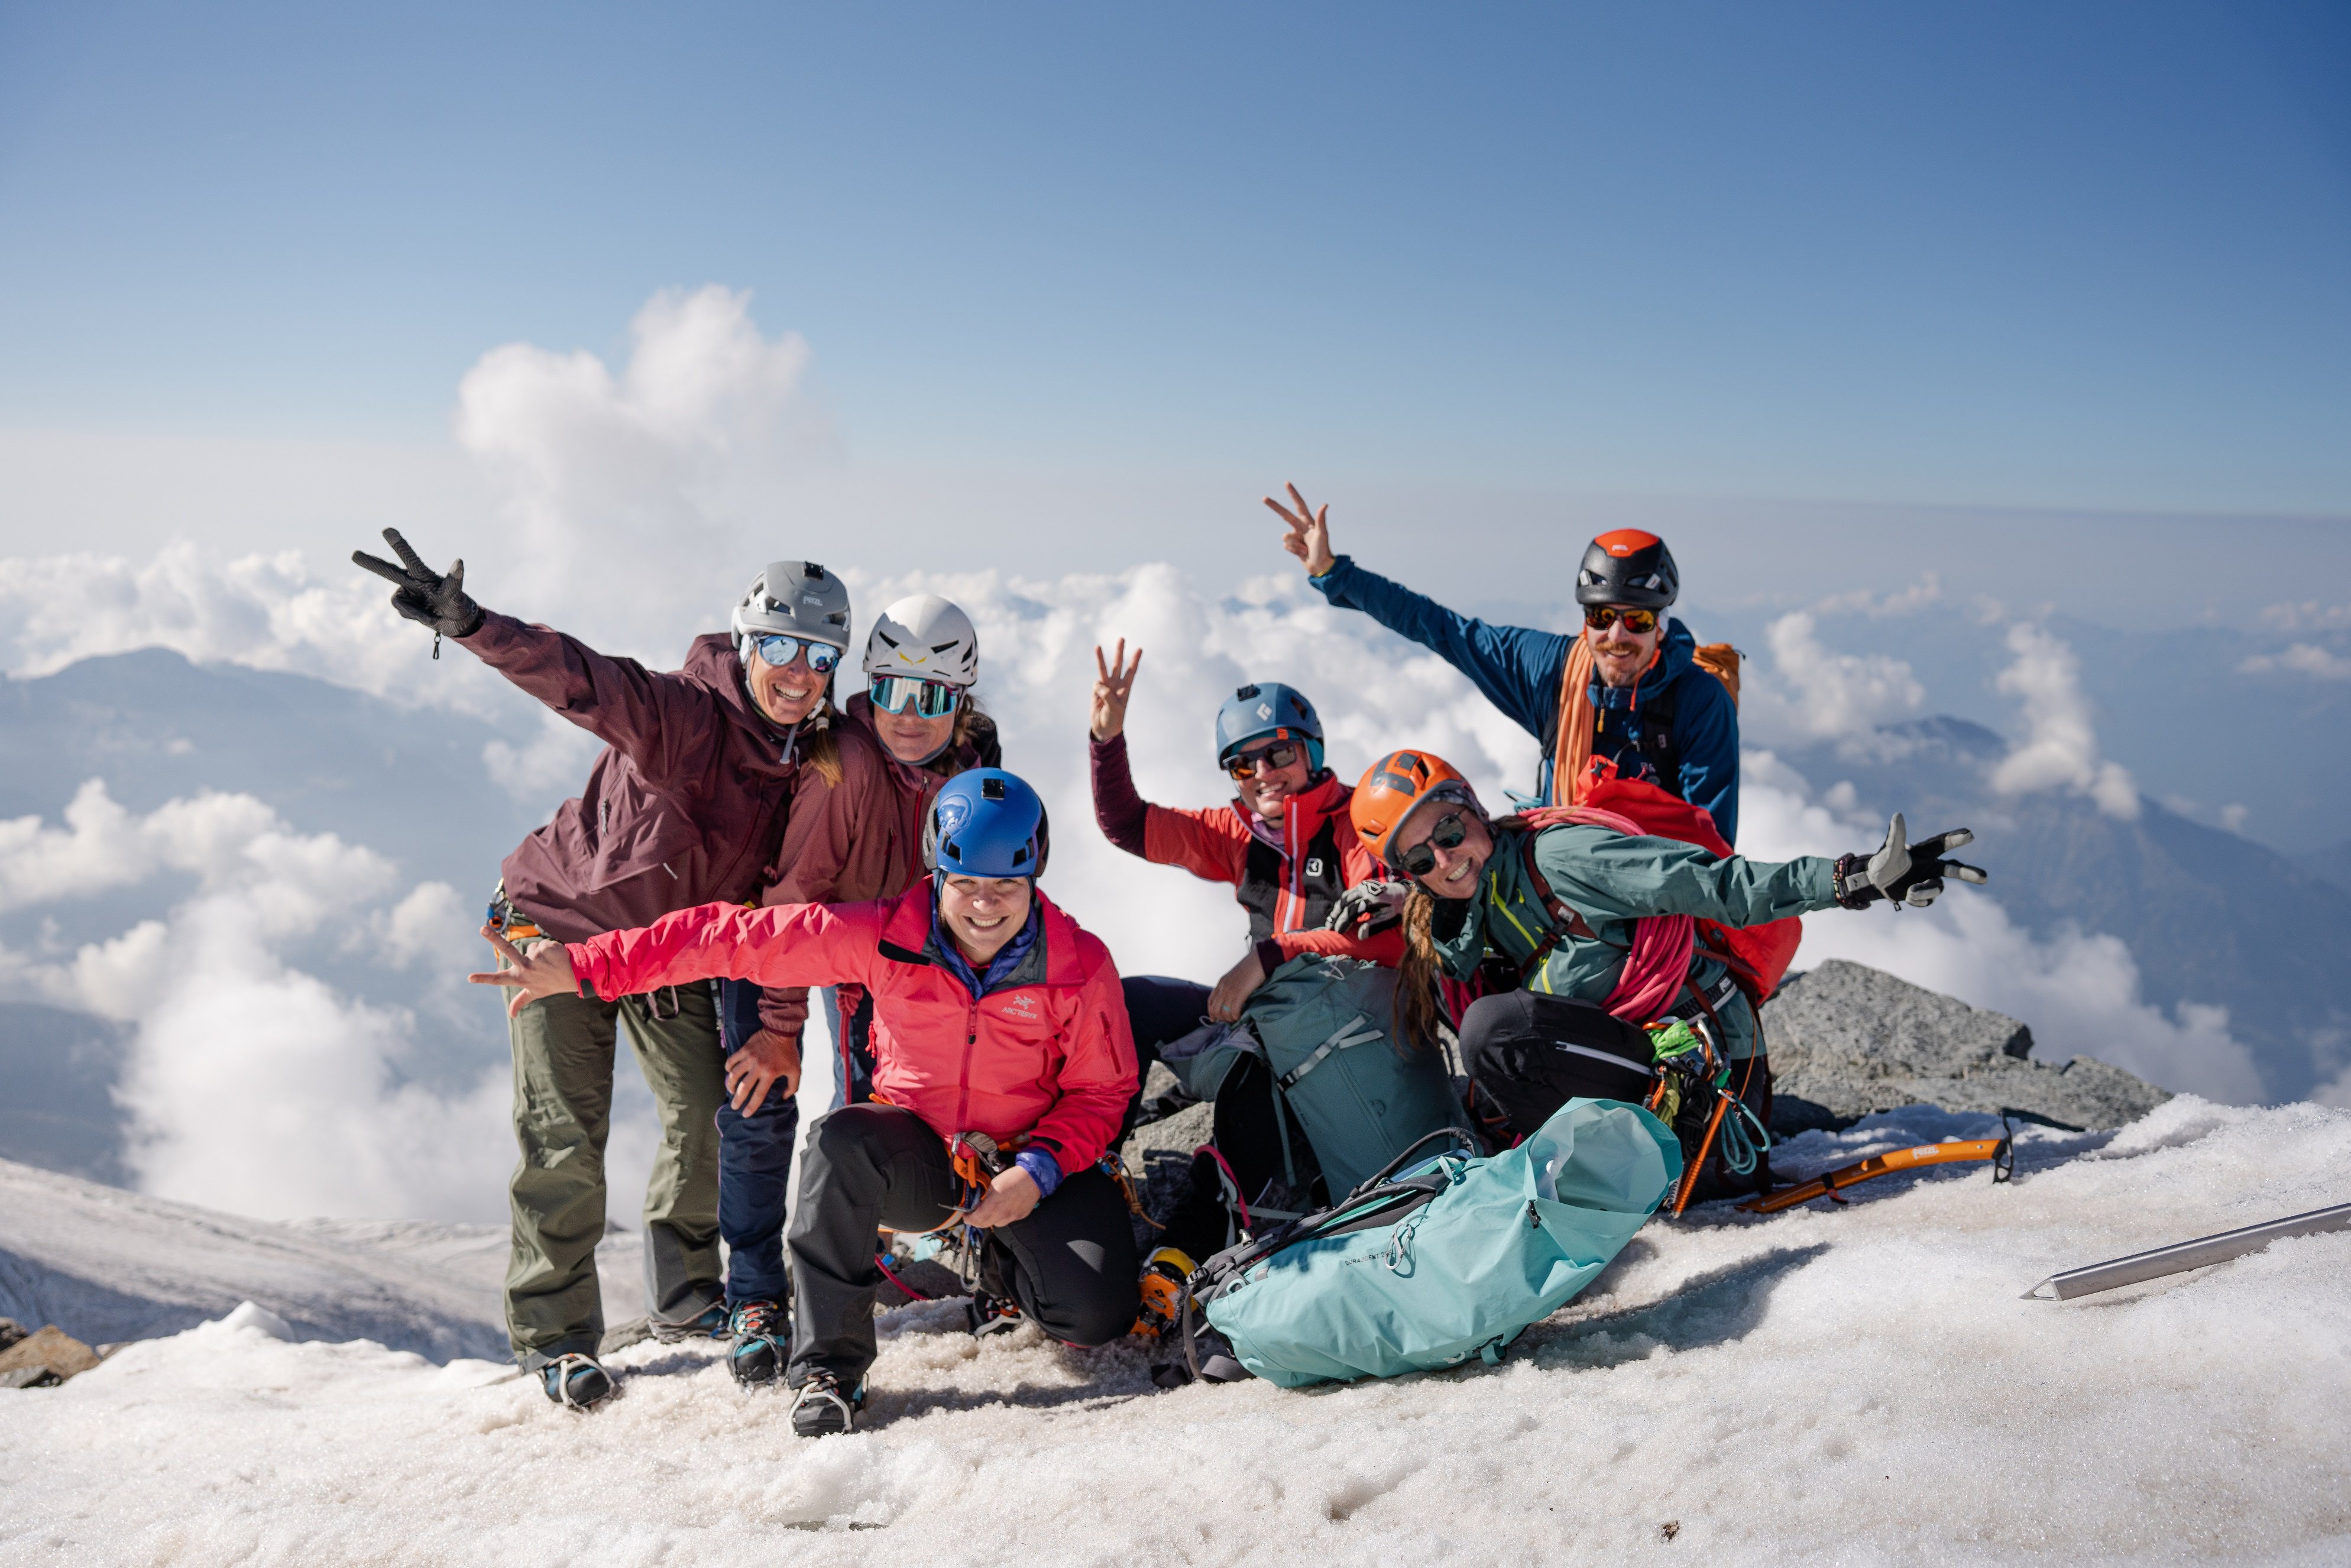 6 people on top of Castor showing 3 fingers each to say it's their third peak